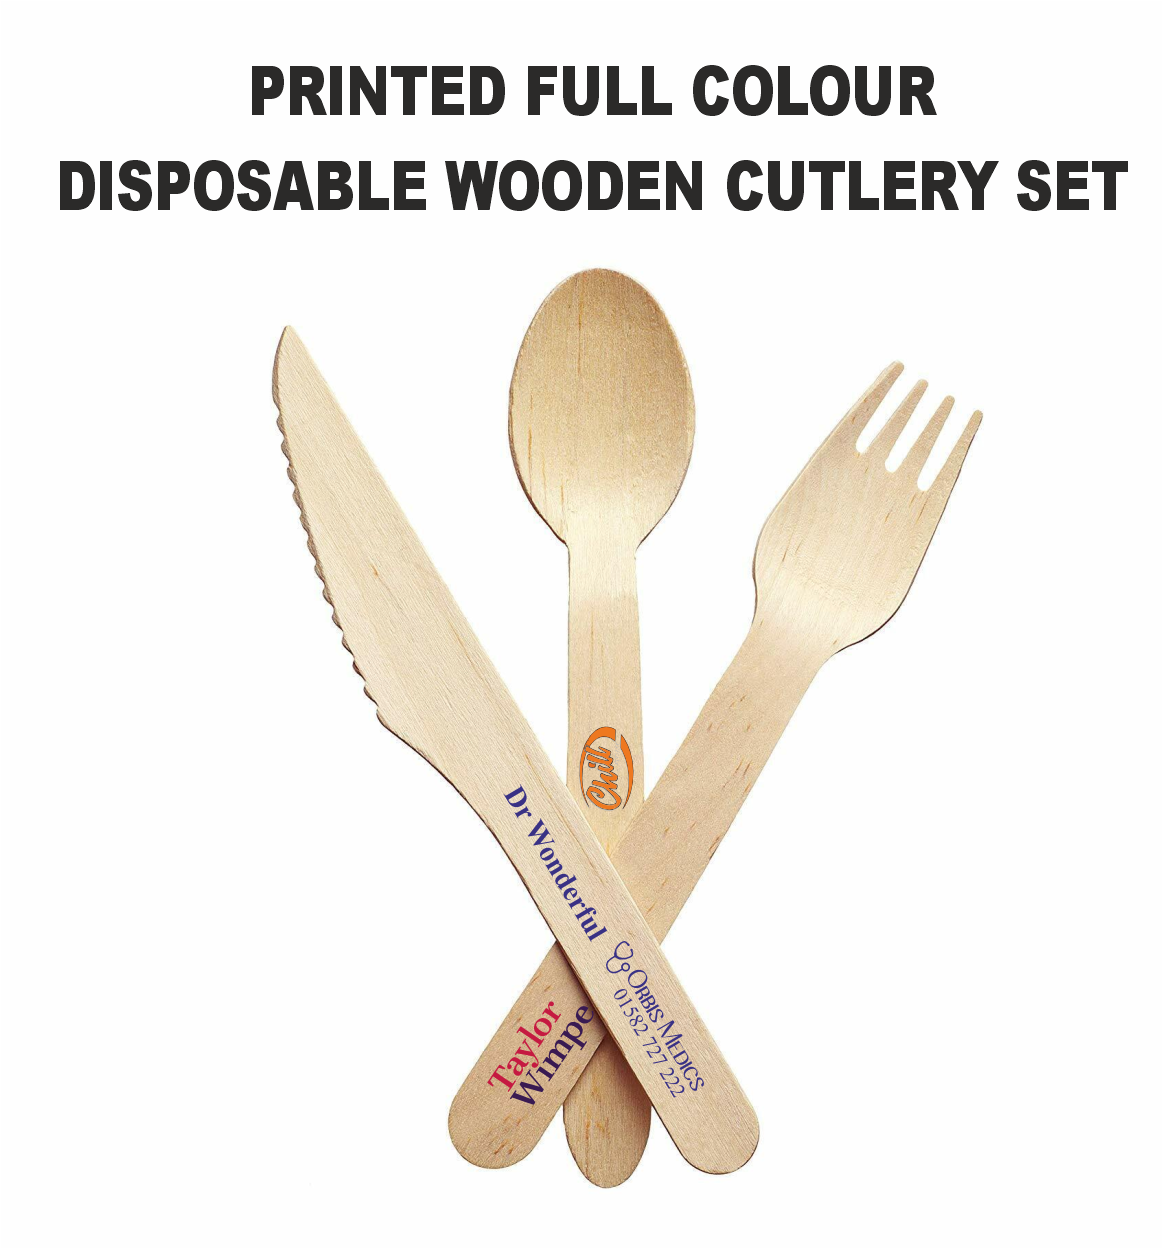 Promotional wooden cutlery 